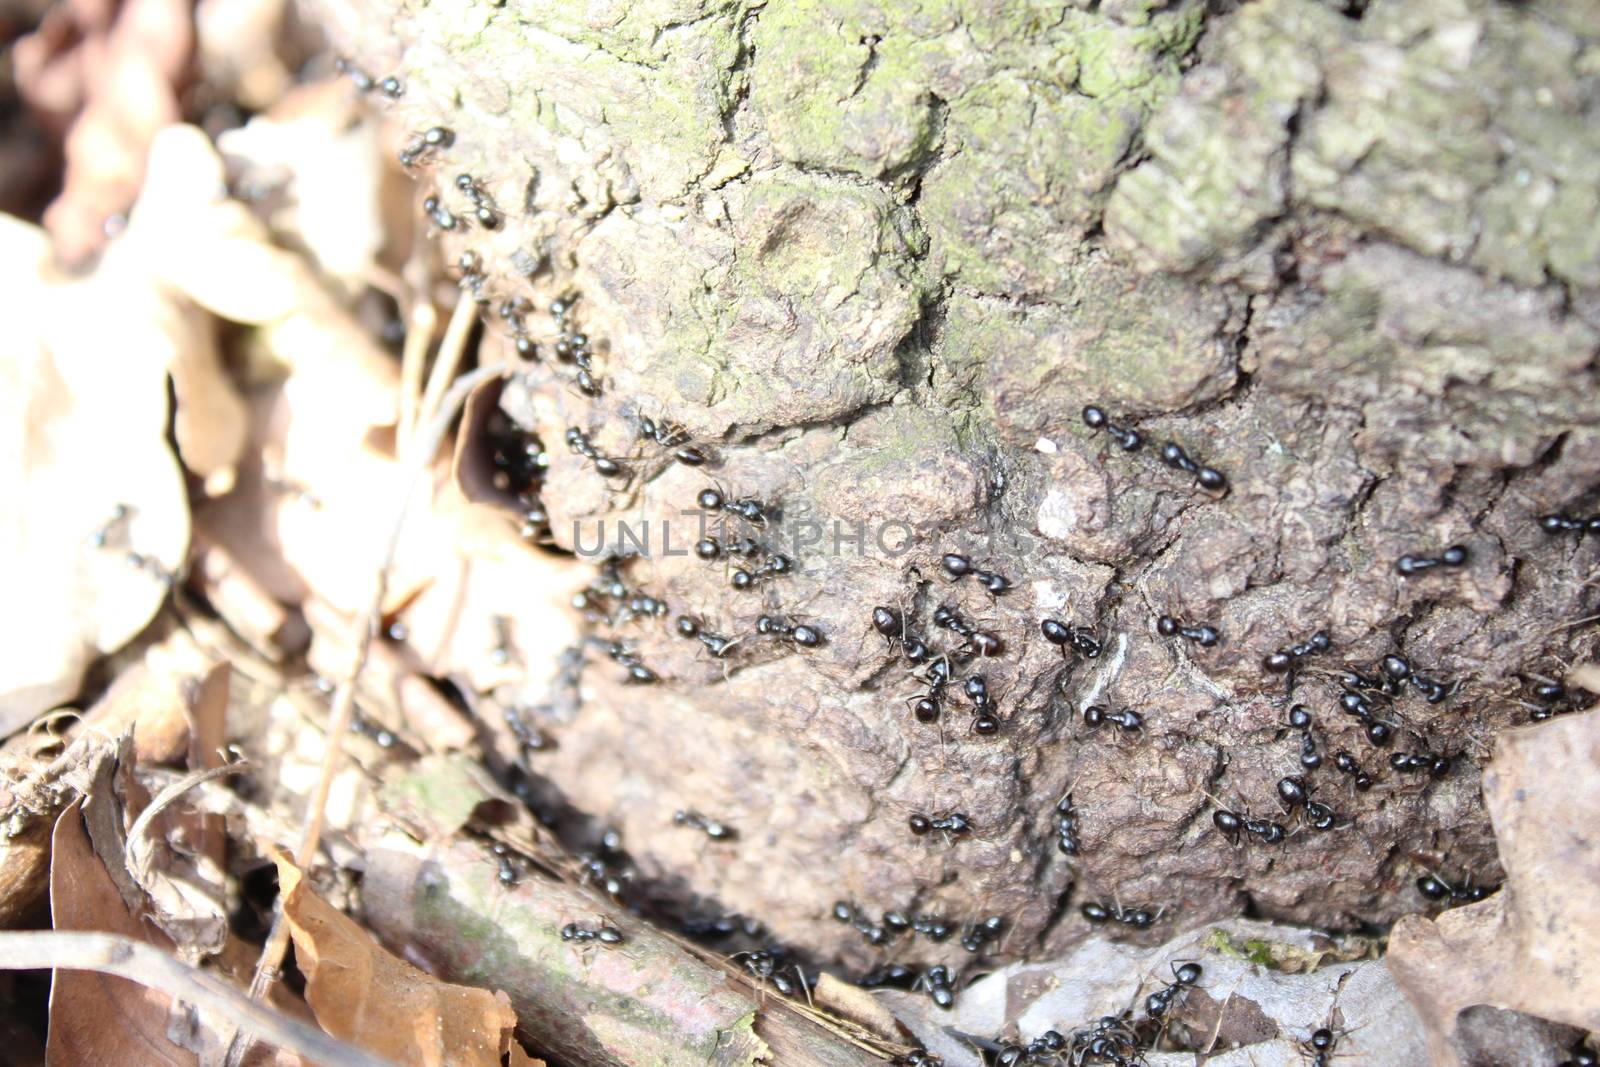 The picture shows black ants in the forest.